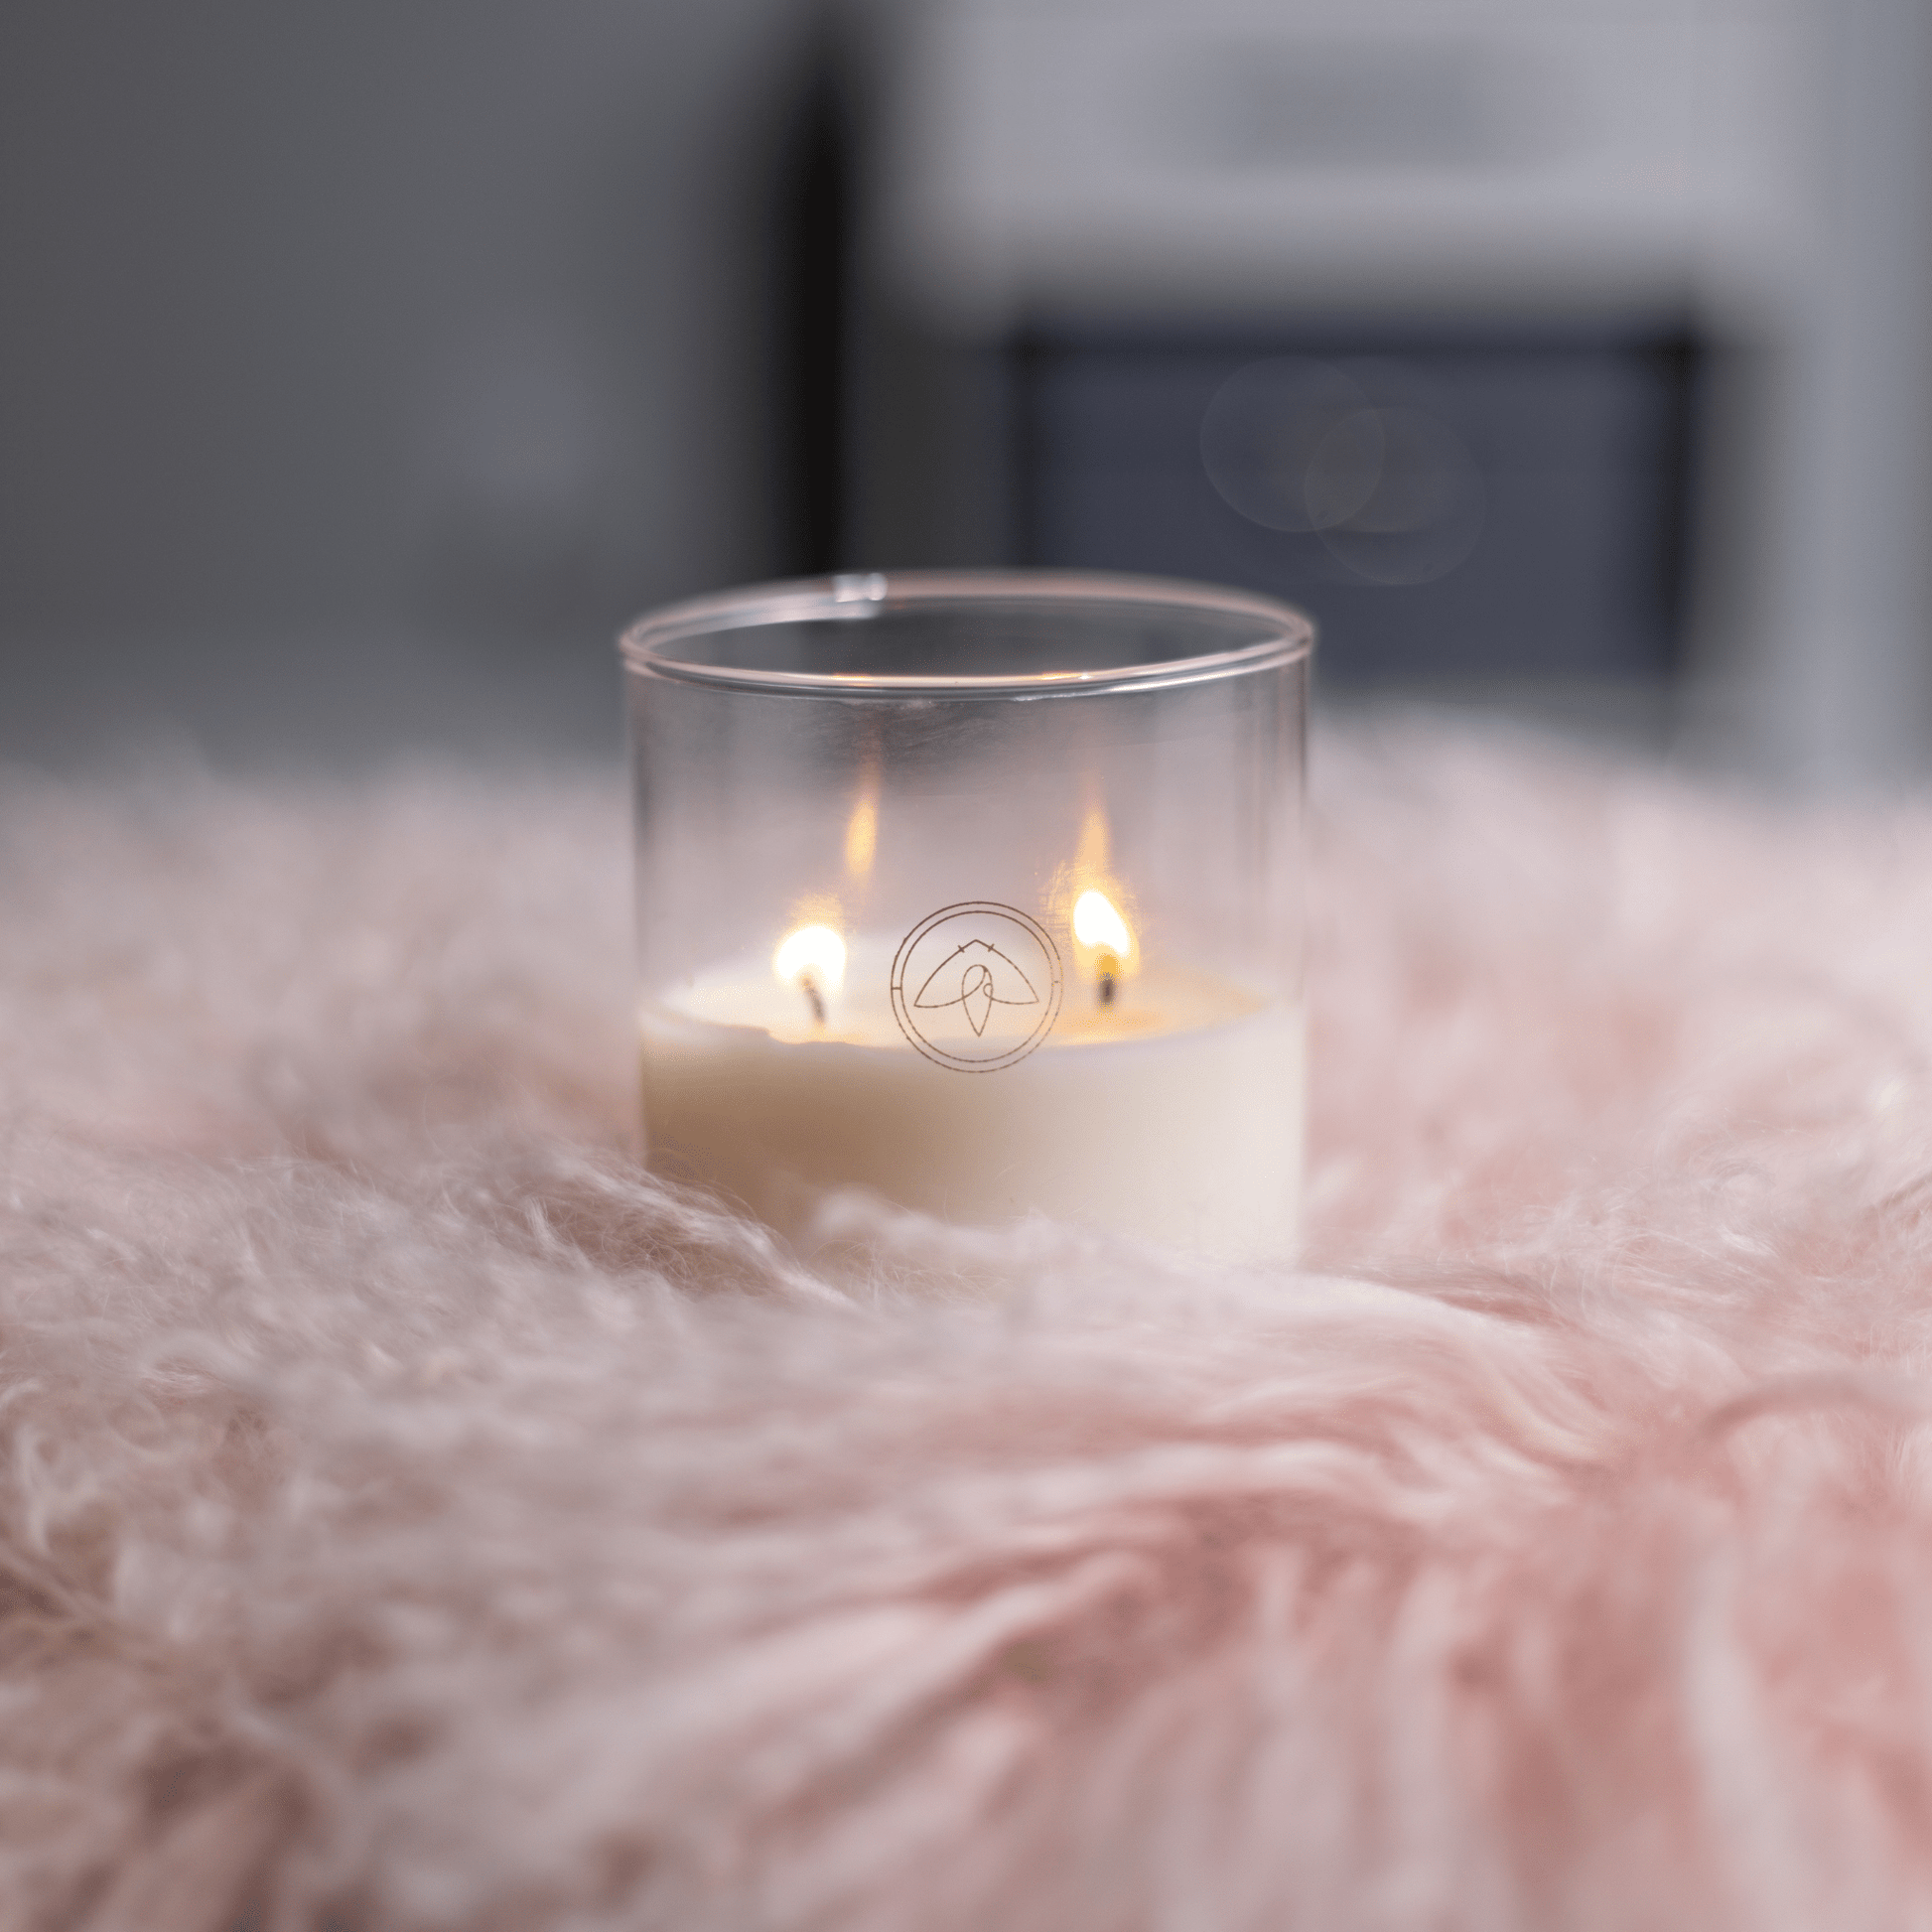 10oz Clarity two wick candle on light colored shag blanket